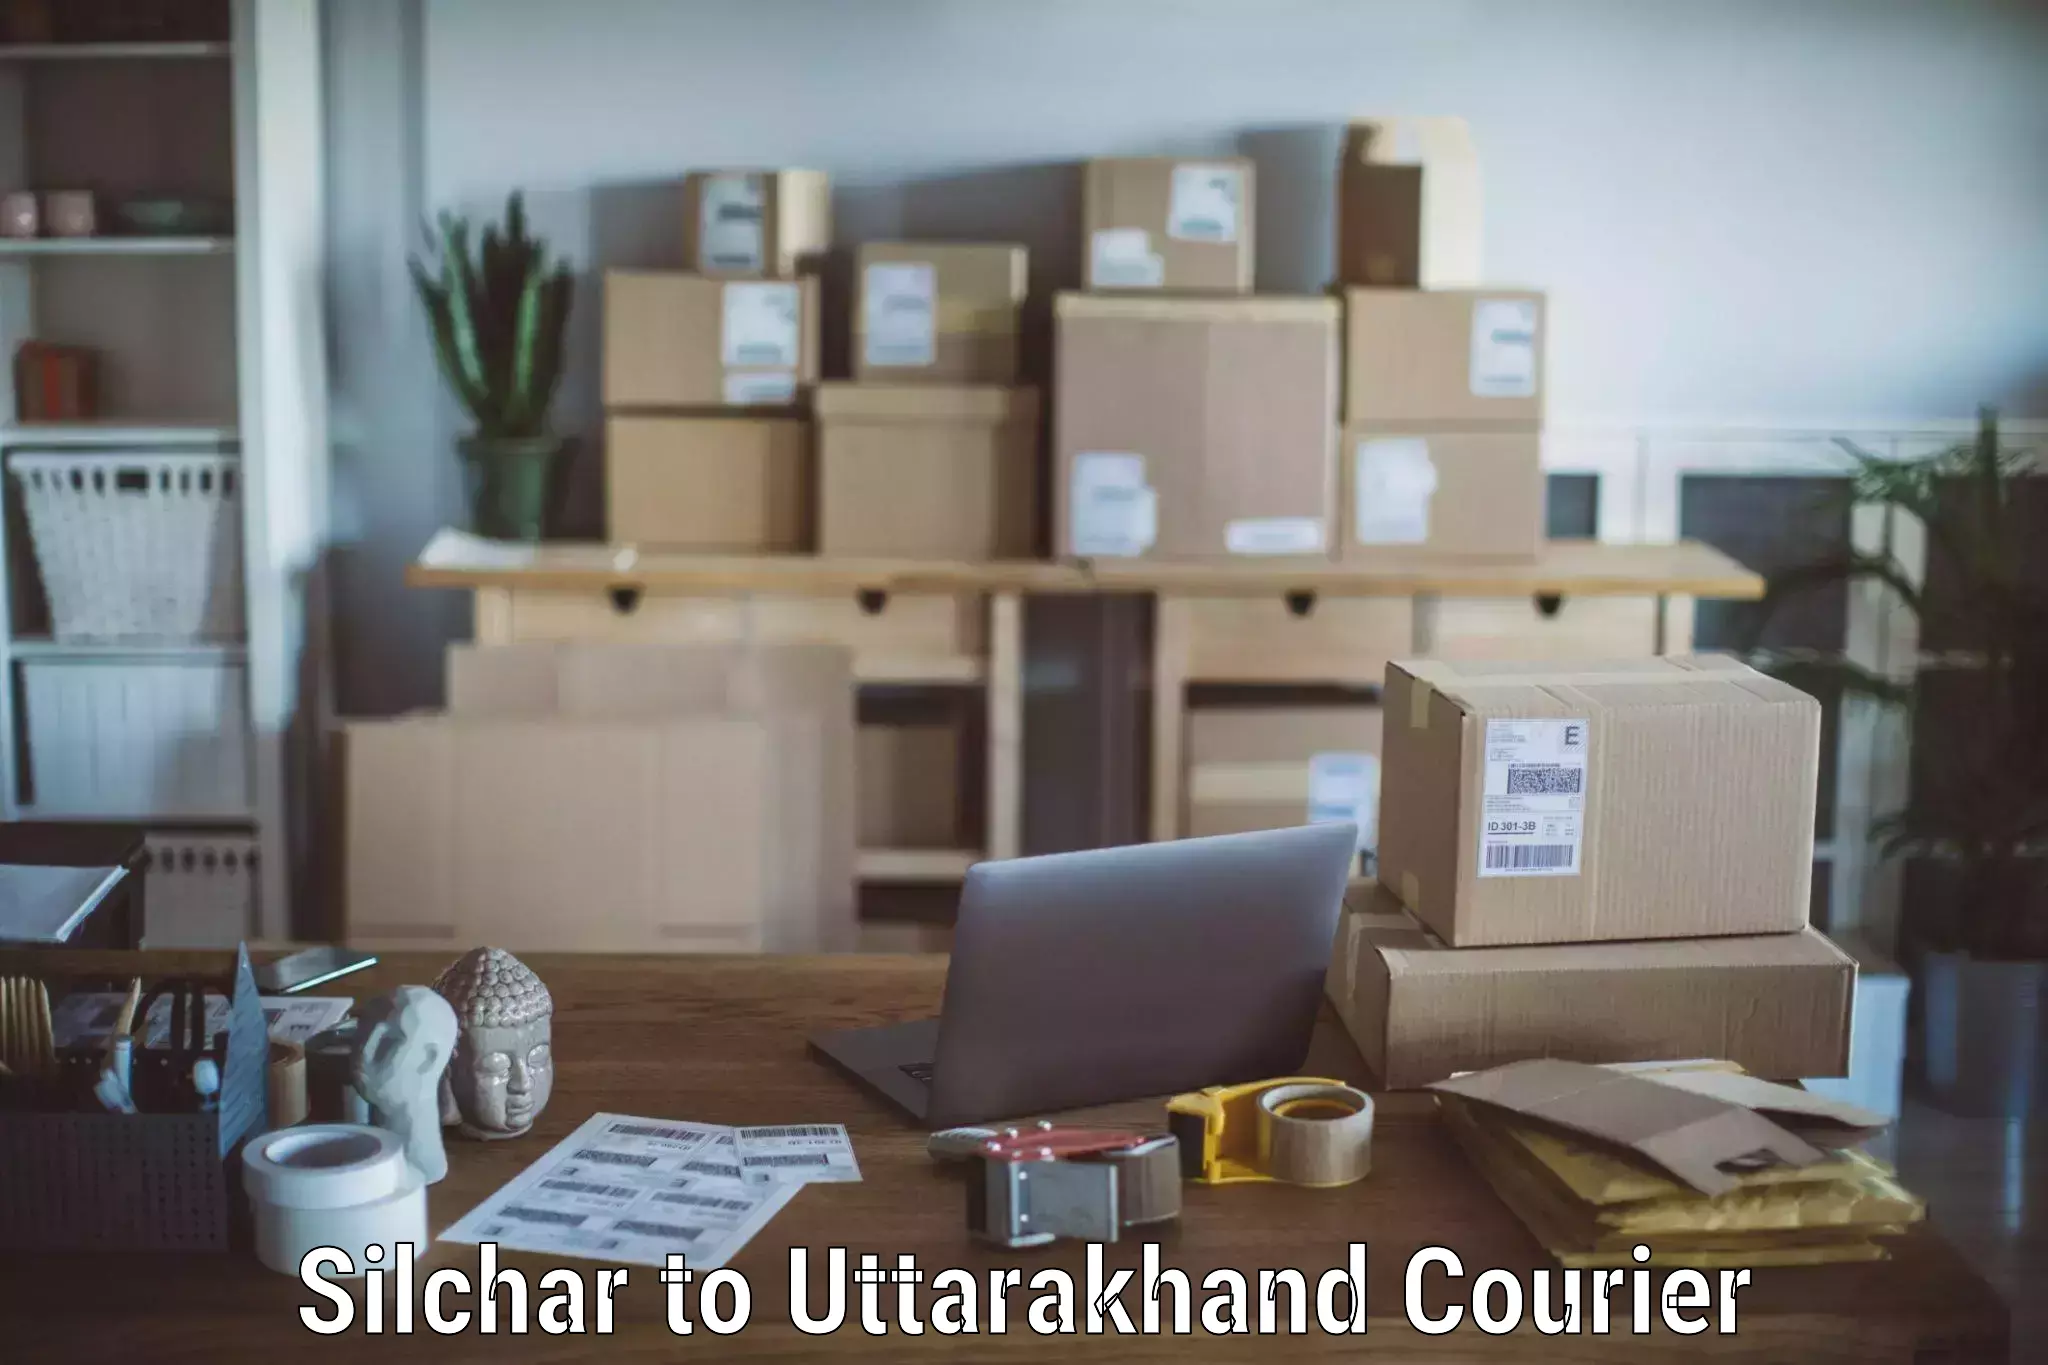 Quality relocation services Silchar to Rudrapur